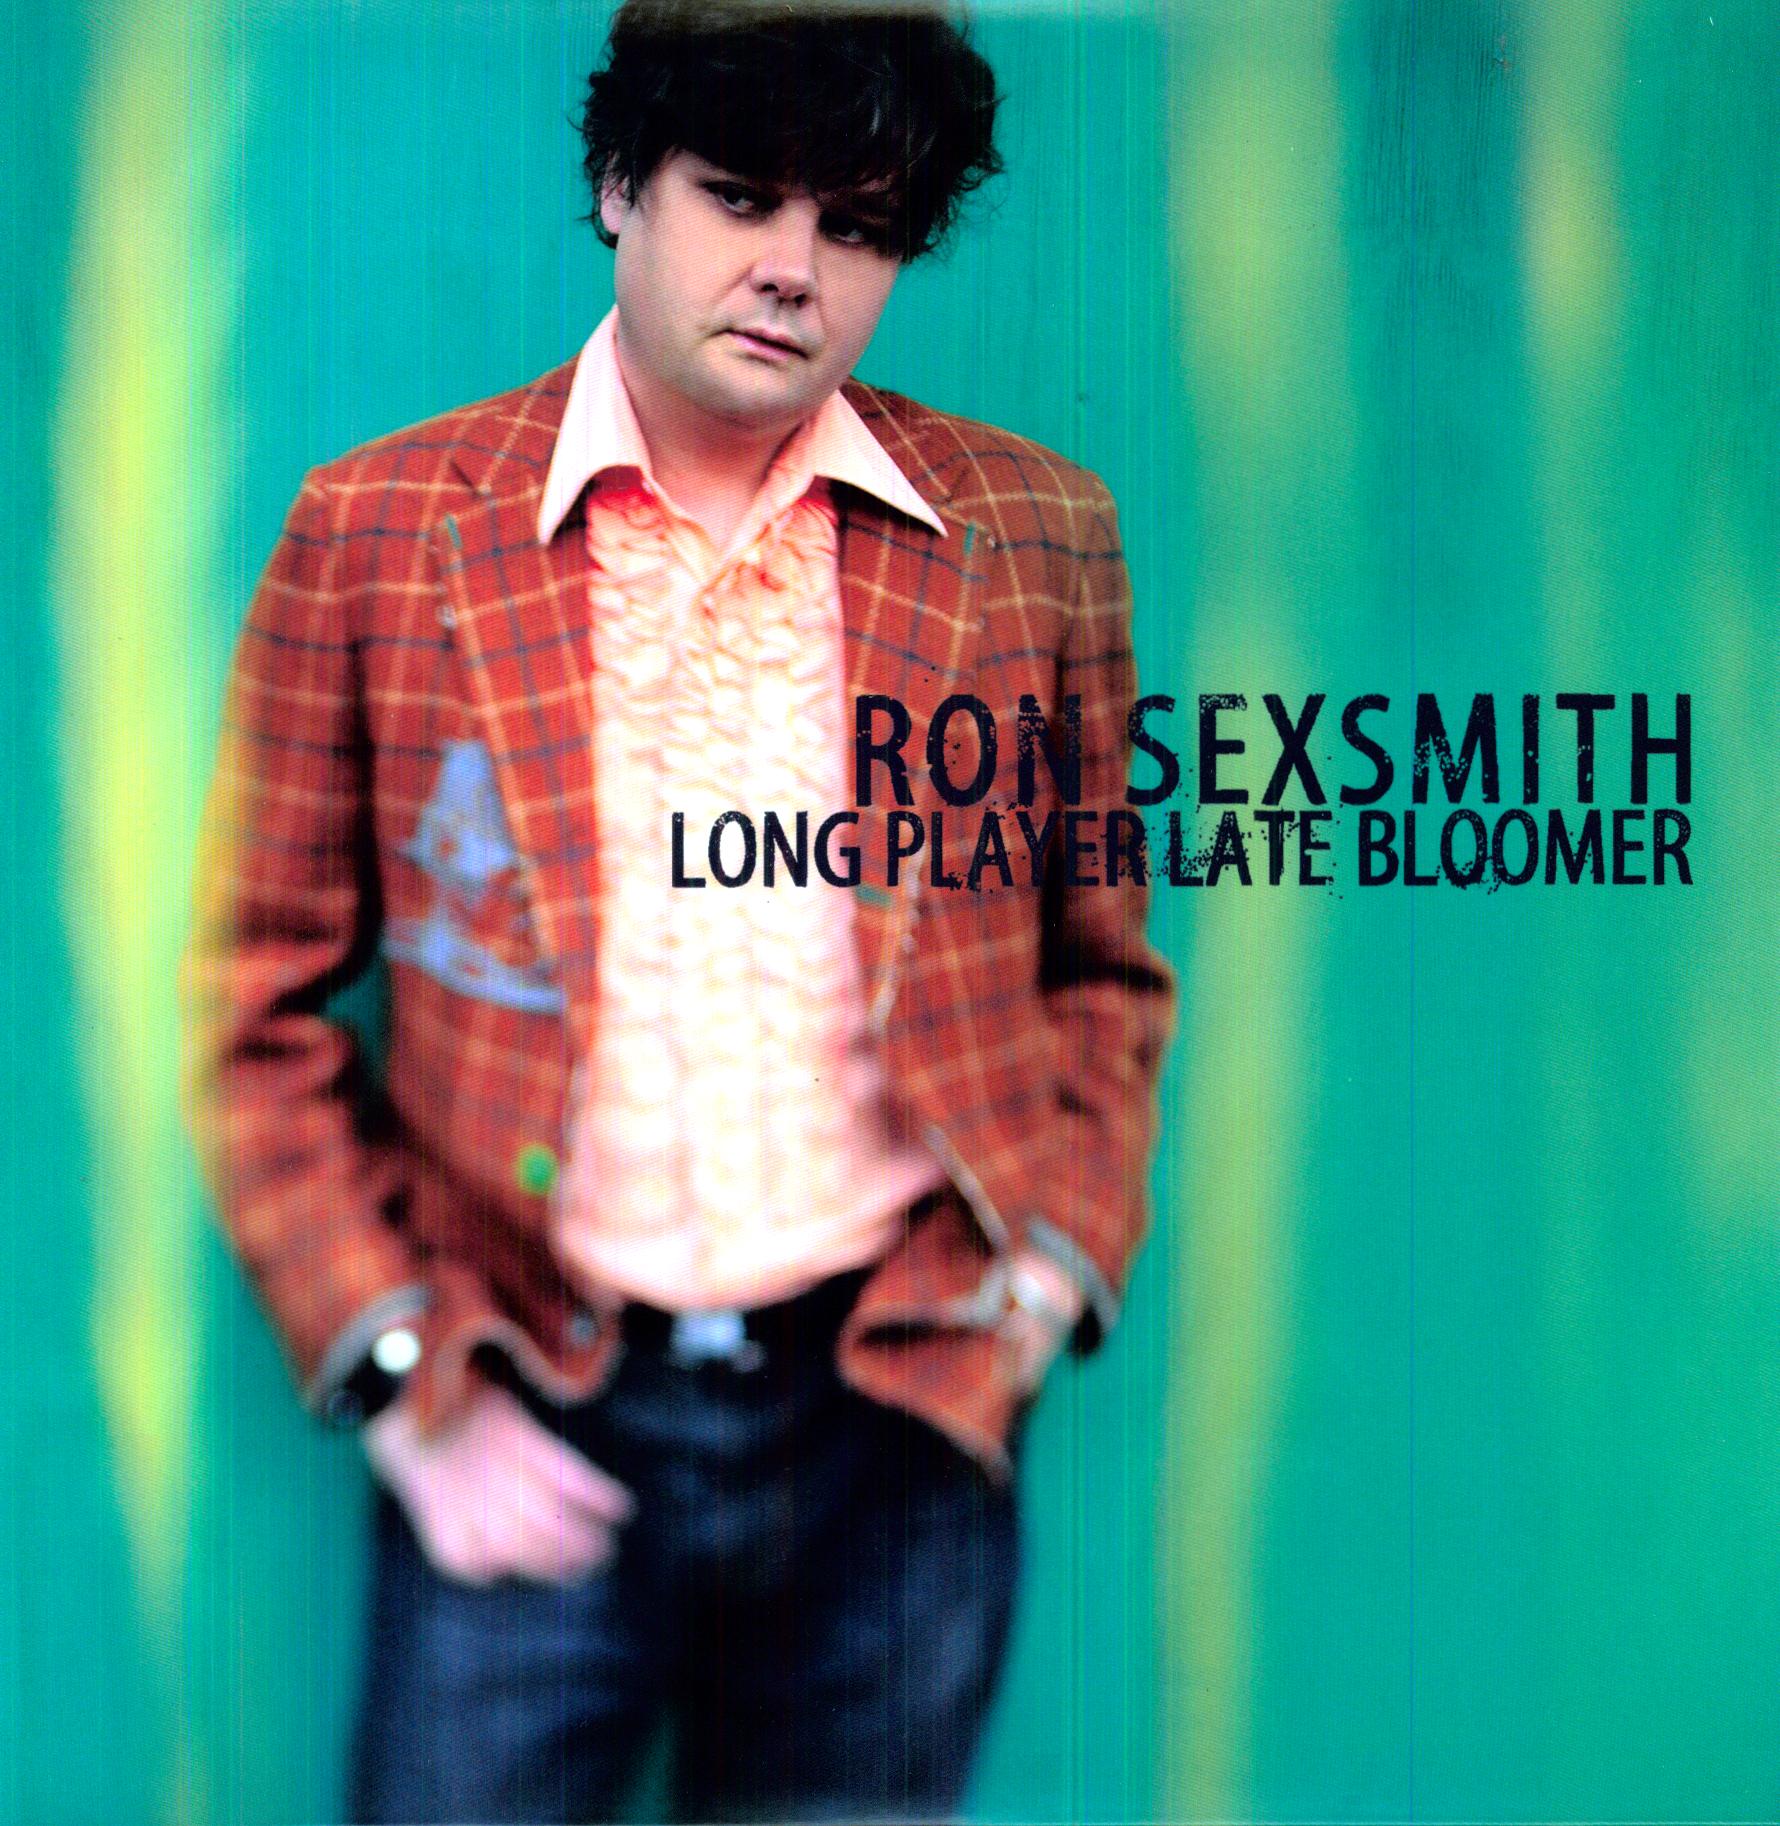 LONG PLAYER LATE BLOOMER (CAN)